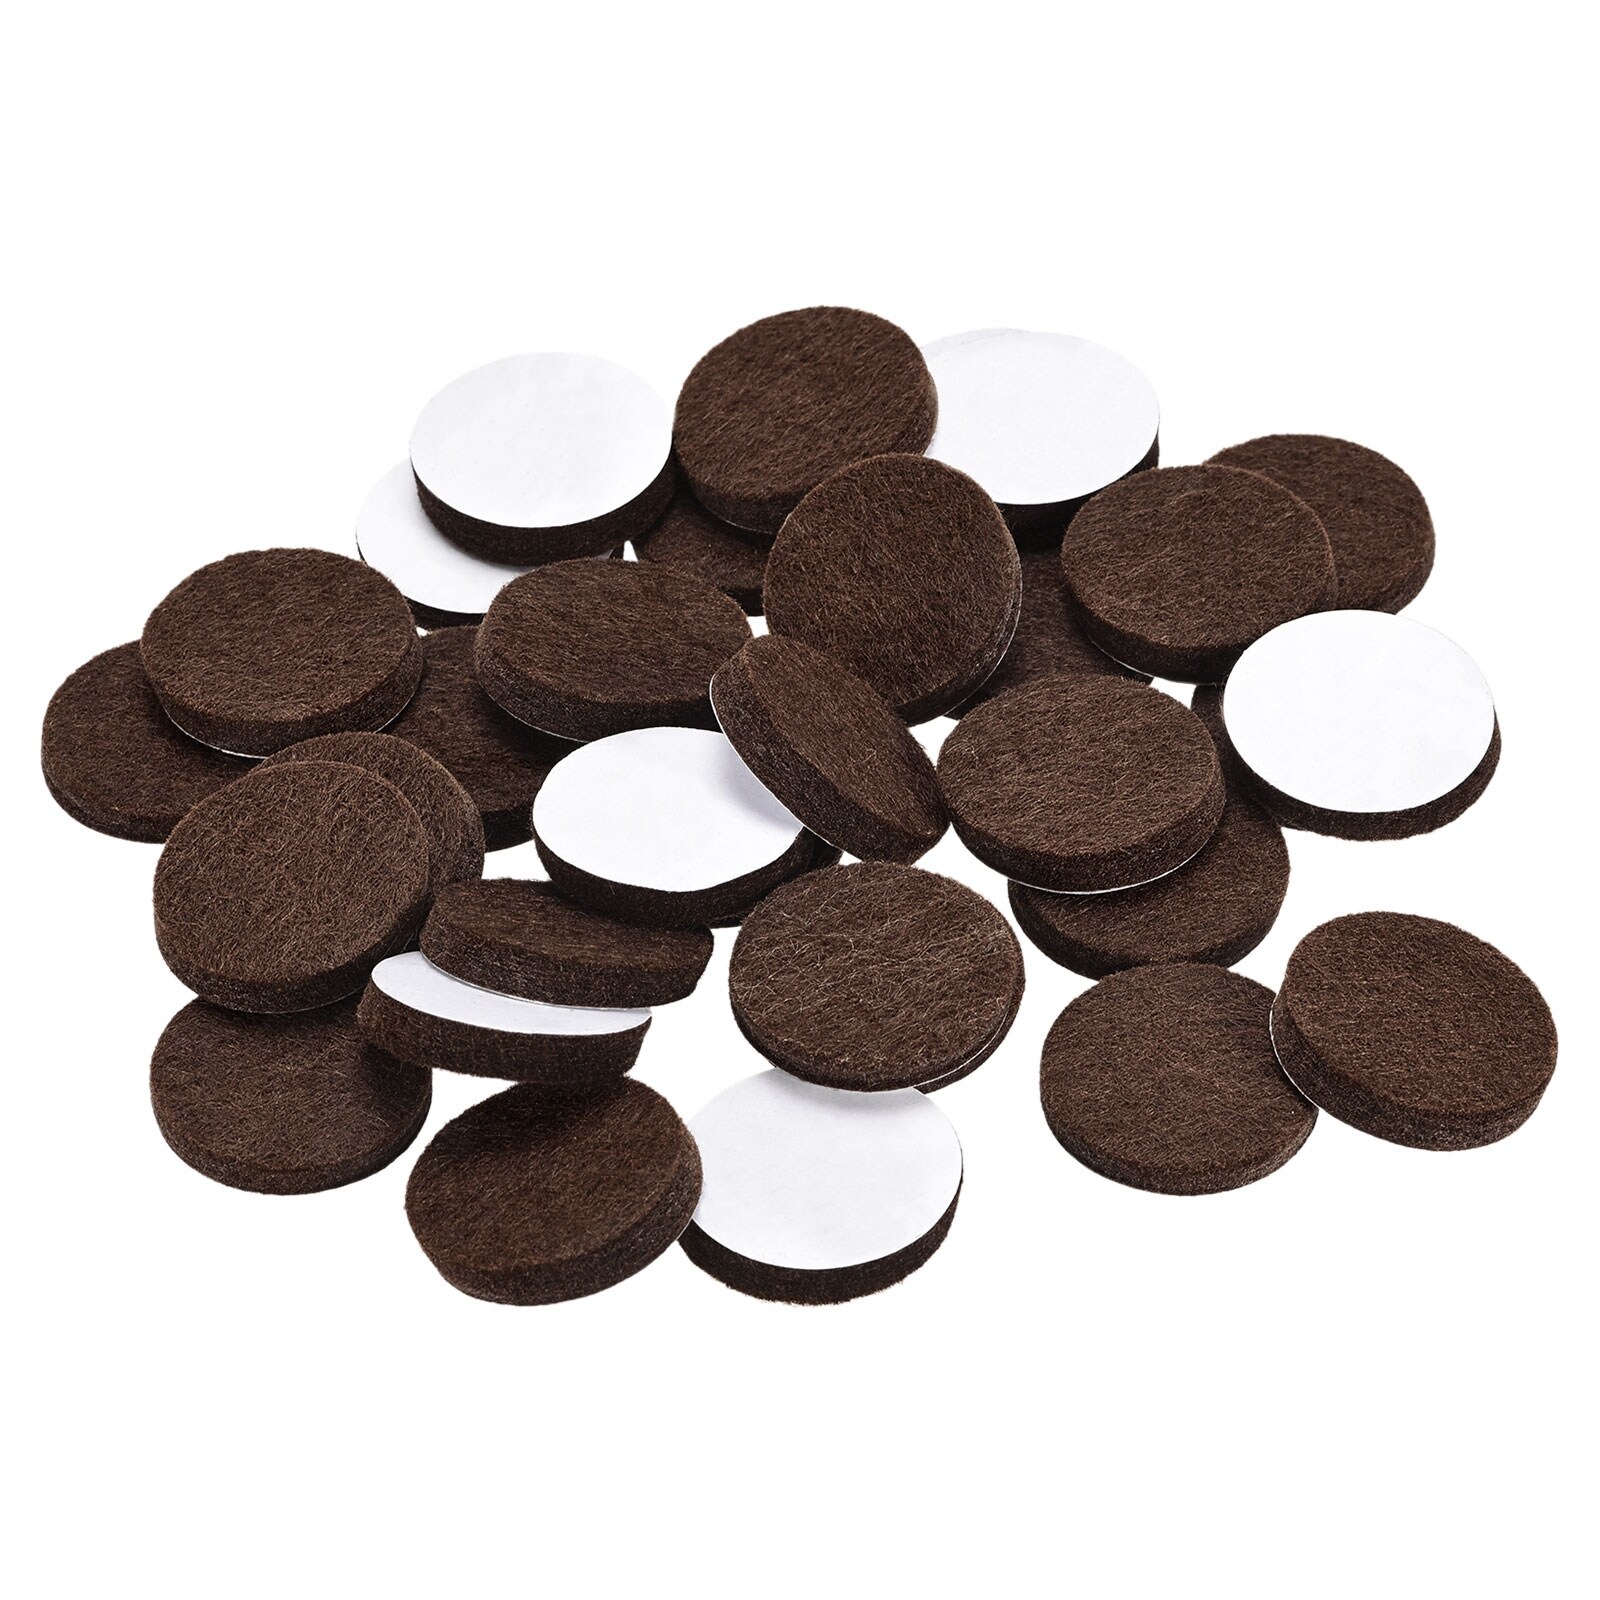 Felt Furniture Pads Black 1 48Pieces Pack Round Self Adhesive Furniture  Pads Anti Scratch Felt Pads Heavy Duty 5mm Thick Floor Protector for Chair